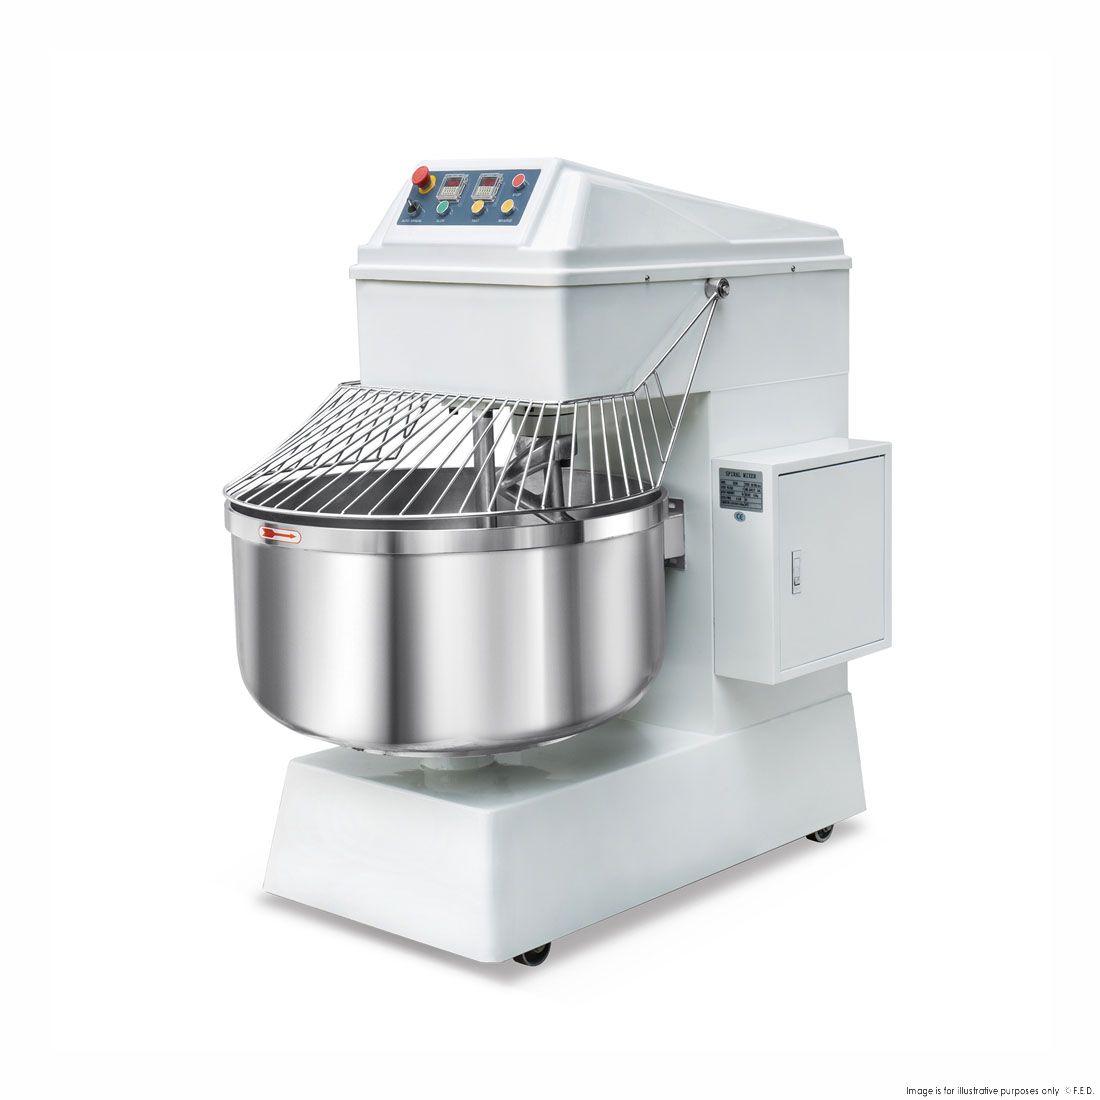 10 Liter Planetary Mixer, Advanced spiral mixers for bakeries